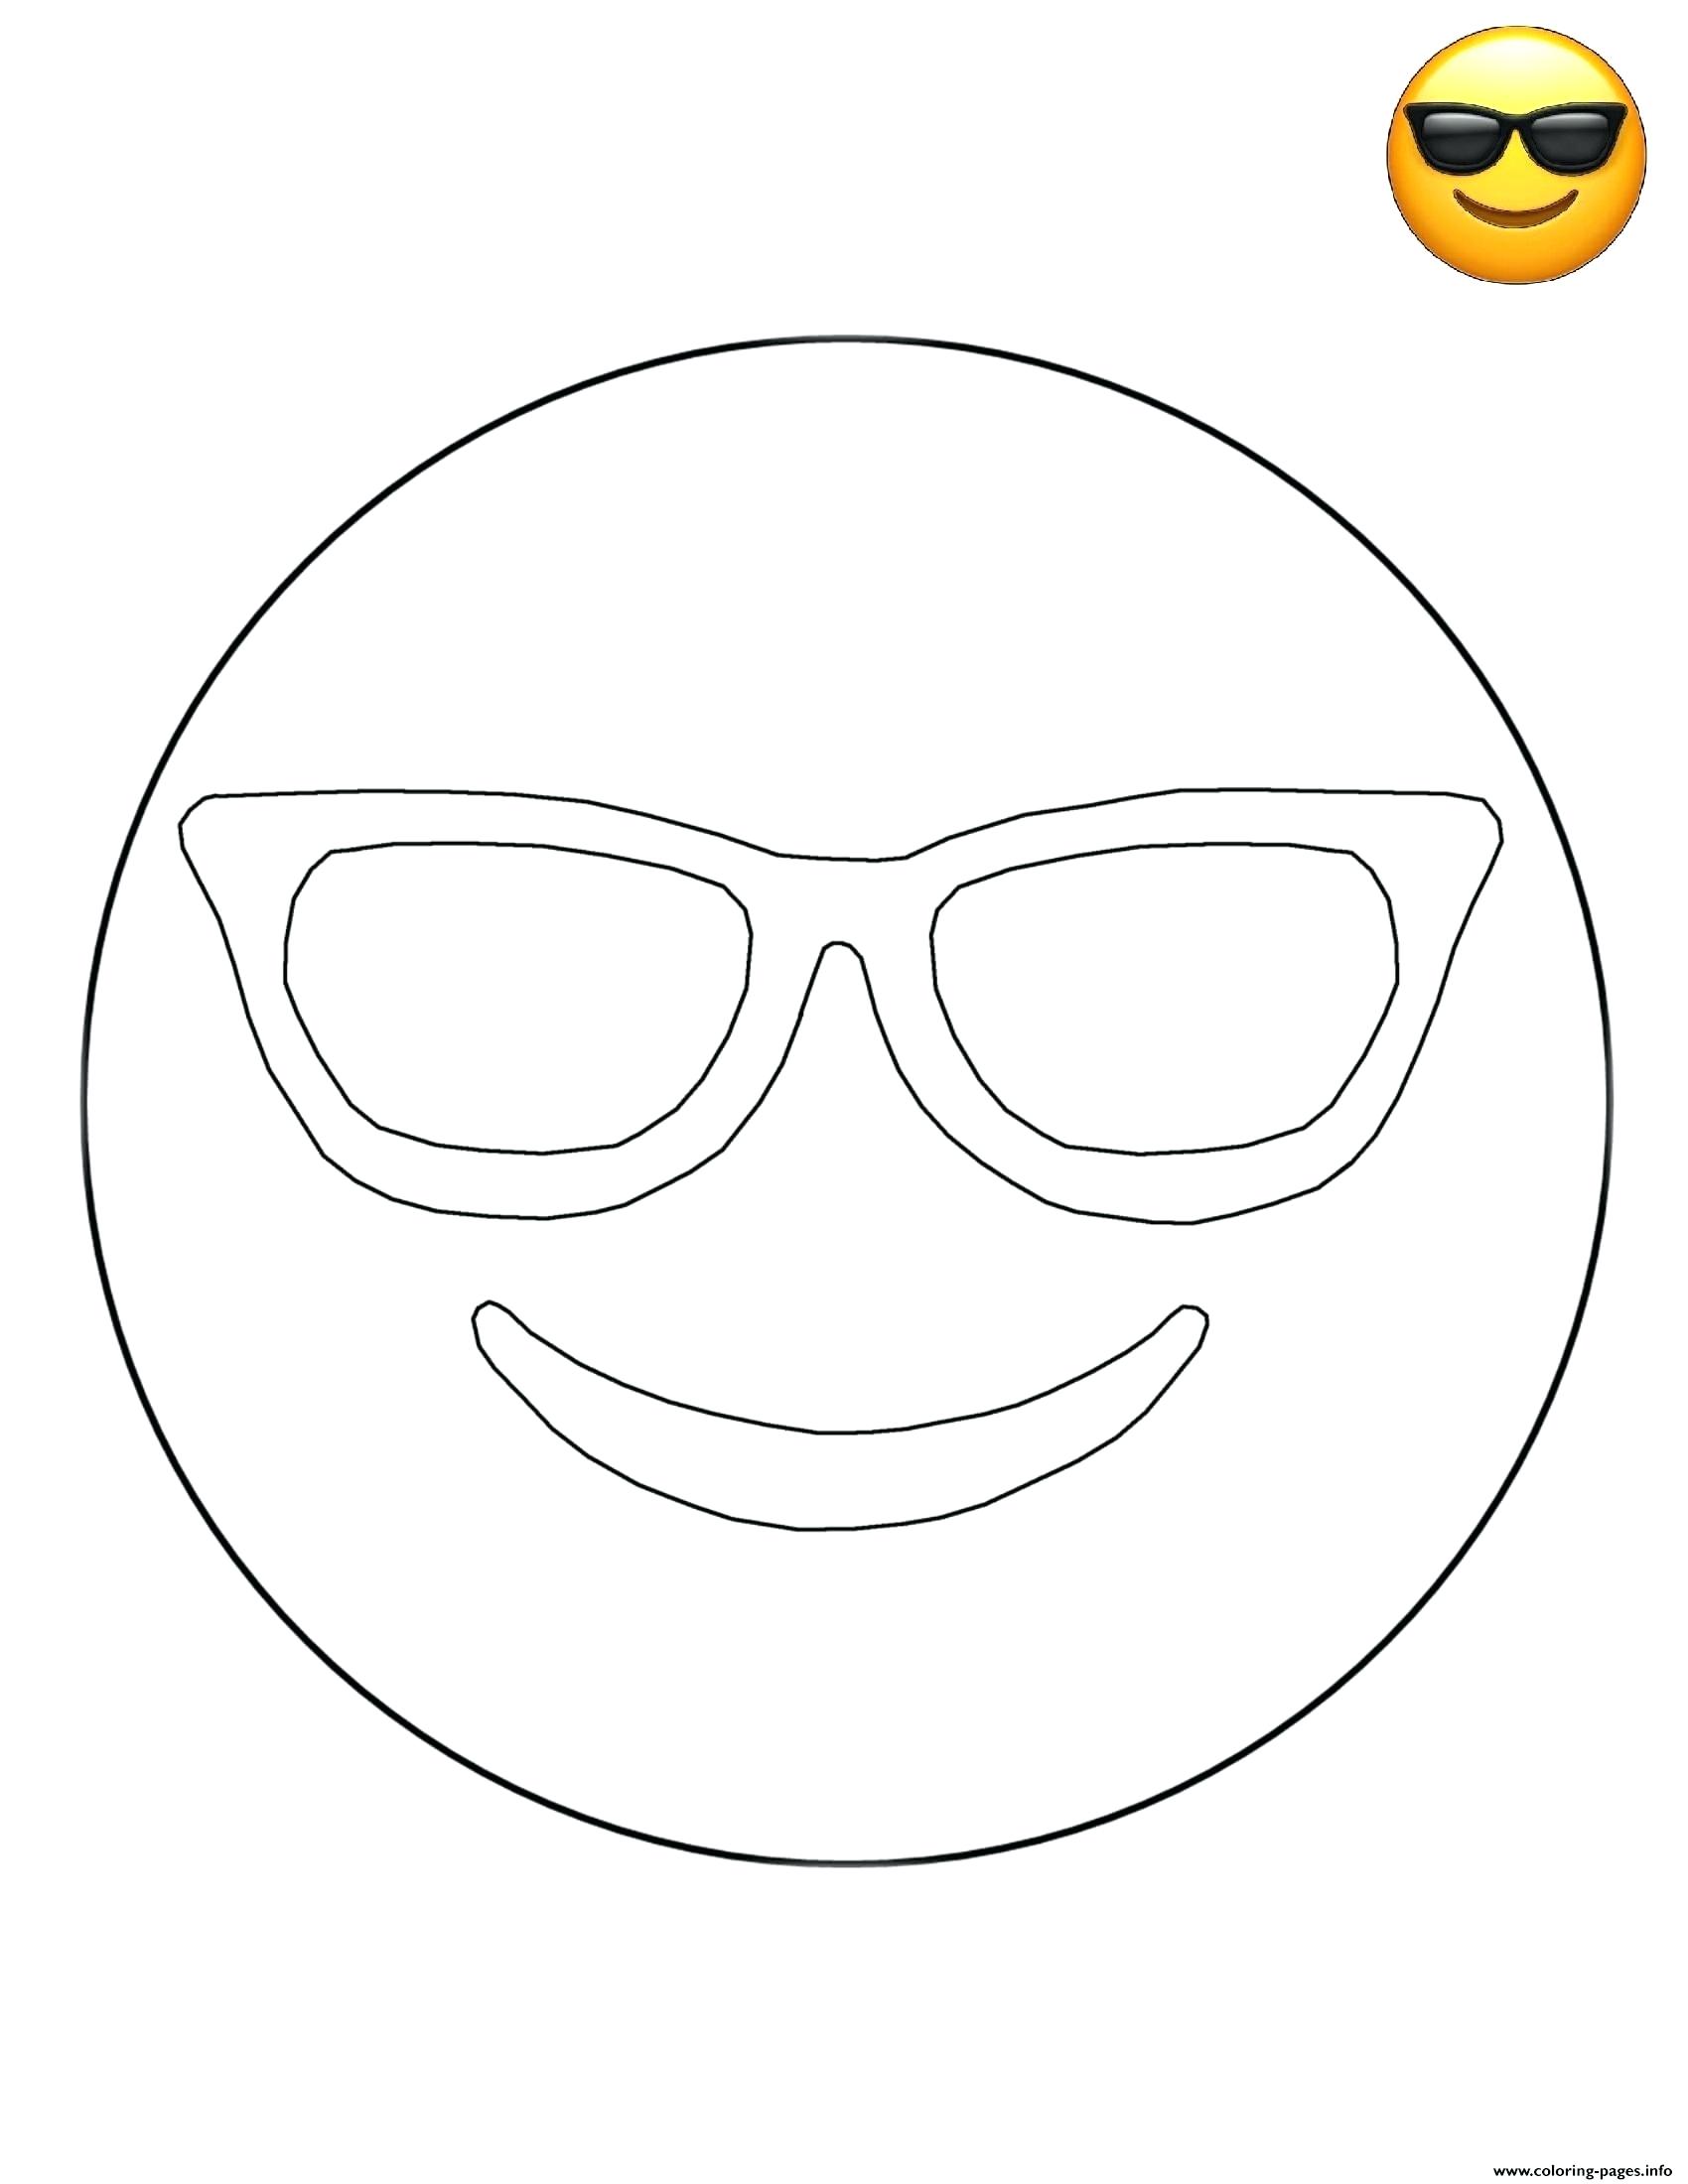 Best Coloring : Emoji Pages To Print Sunglasses Free Sheets ...